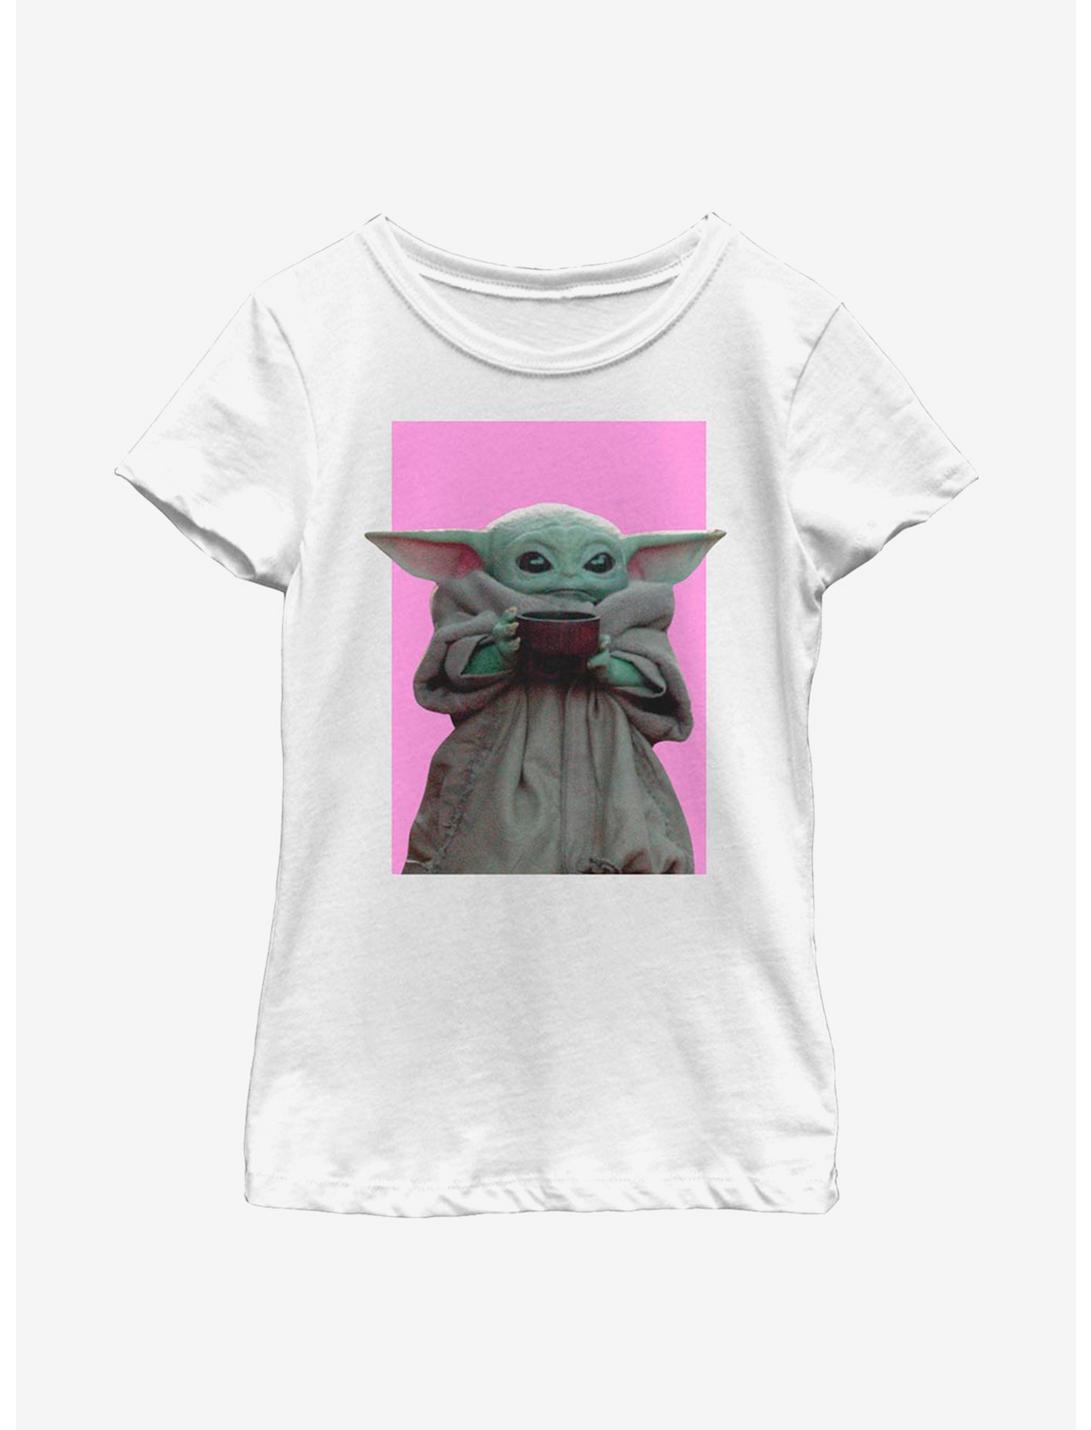 Star Wars The Mandalorian The Child Pink Background Youth Girls T-Shirt, WHITE, hi-res